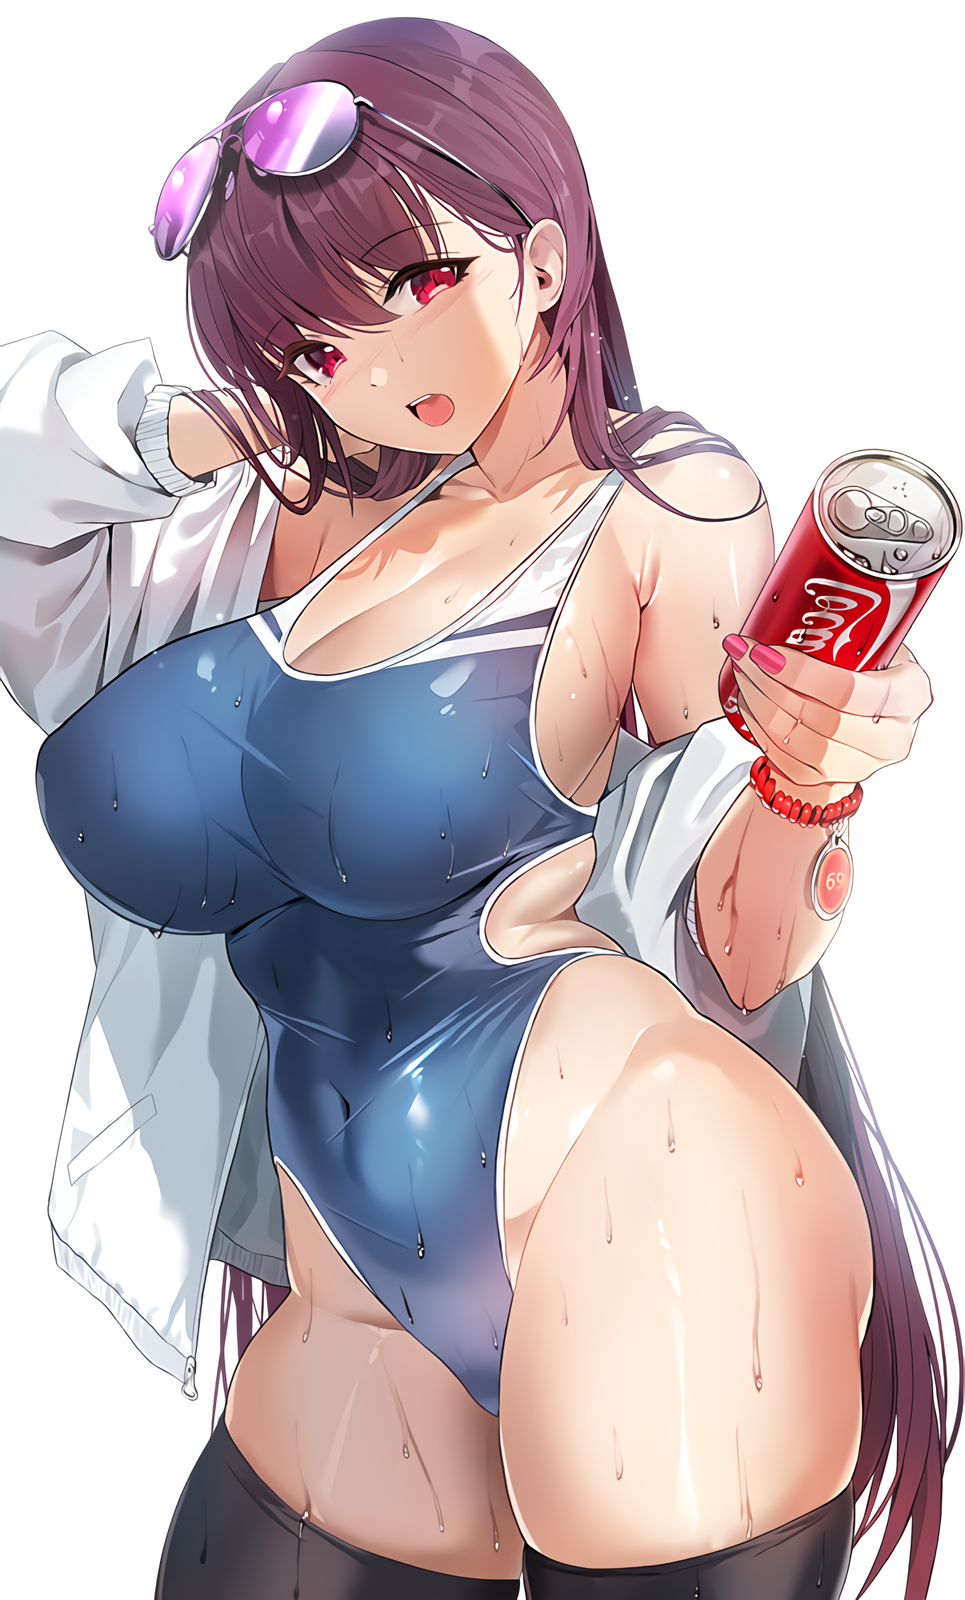 Anime 965x1600 Damda anime girls illustration sweat purple hair long hair red eyes Fate series Fate/Grand Order Scathach one-piece swimsuit swimwear leotard belly button sunglasses open mouth white coat knee-highs stockings thick thigh painted nails Coca-Cola can big boobs curvy white background drink soda portrait wet body wet clothing